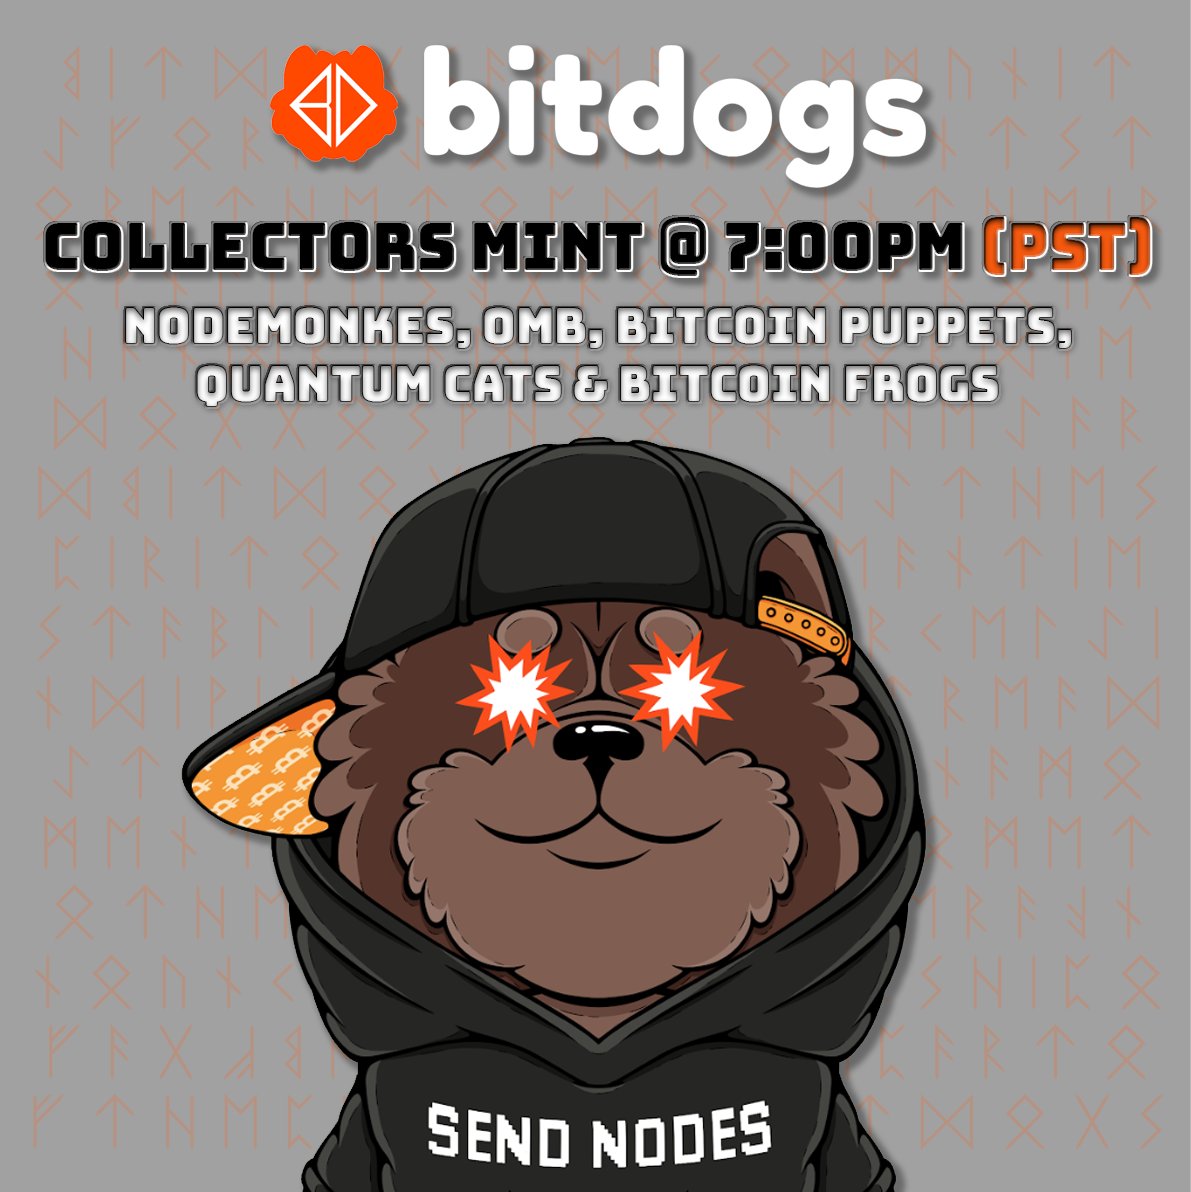 Gm dogs, we have ~2,500 Bitdogs up for grabs heading into the public mint. Collector round starts in 1 hour and is open to: @nodemonkes @OrdinalMaxiBiz BTC Puppets by @lepuppeteerfou @BitcoinFrogs @QuantumCatsXYZ Reminder: You do not need to connect your wallet to mint :)